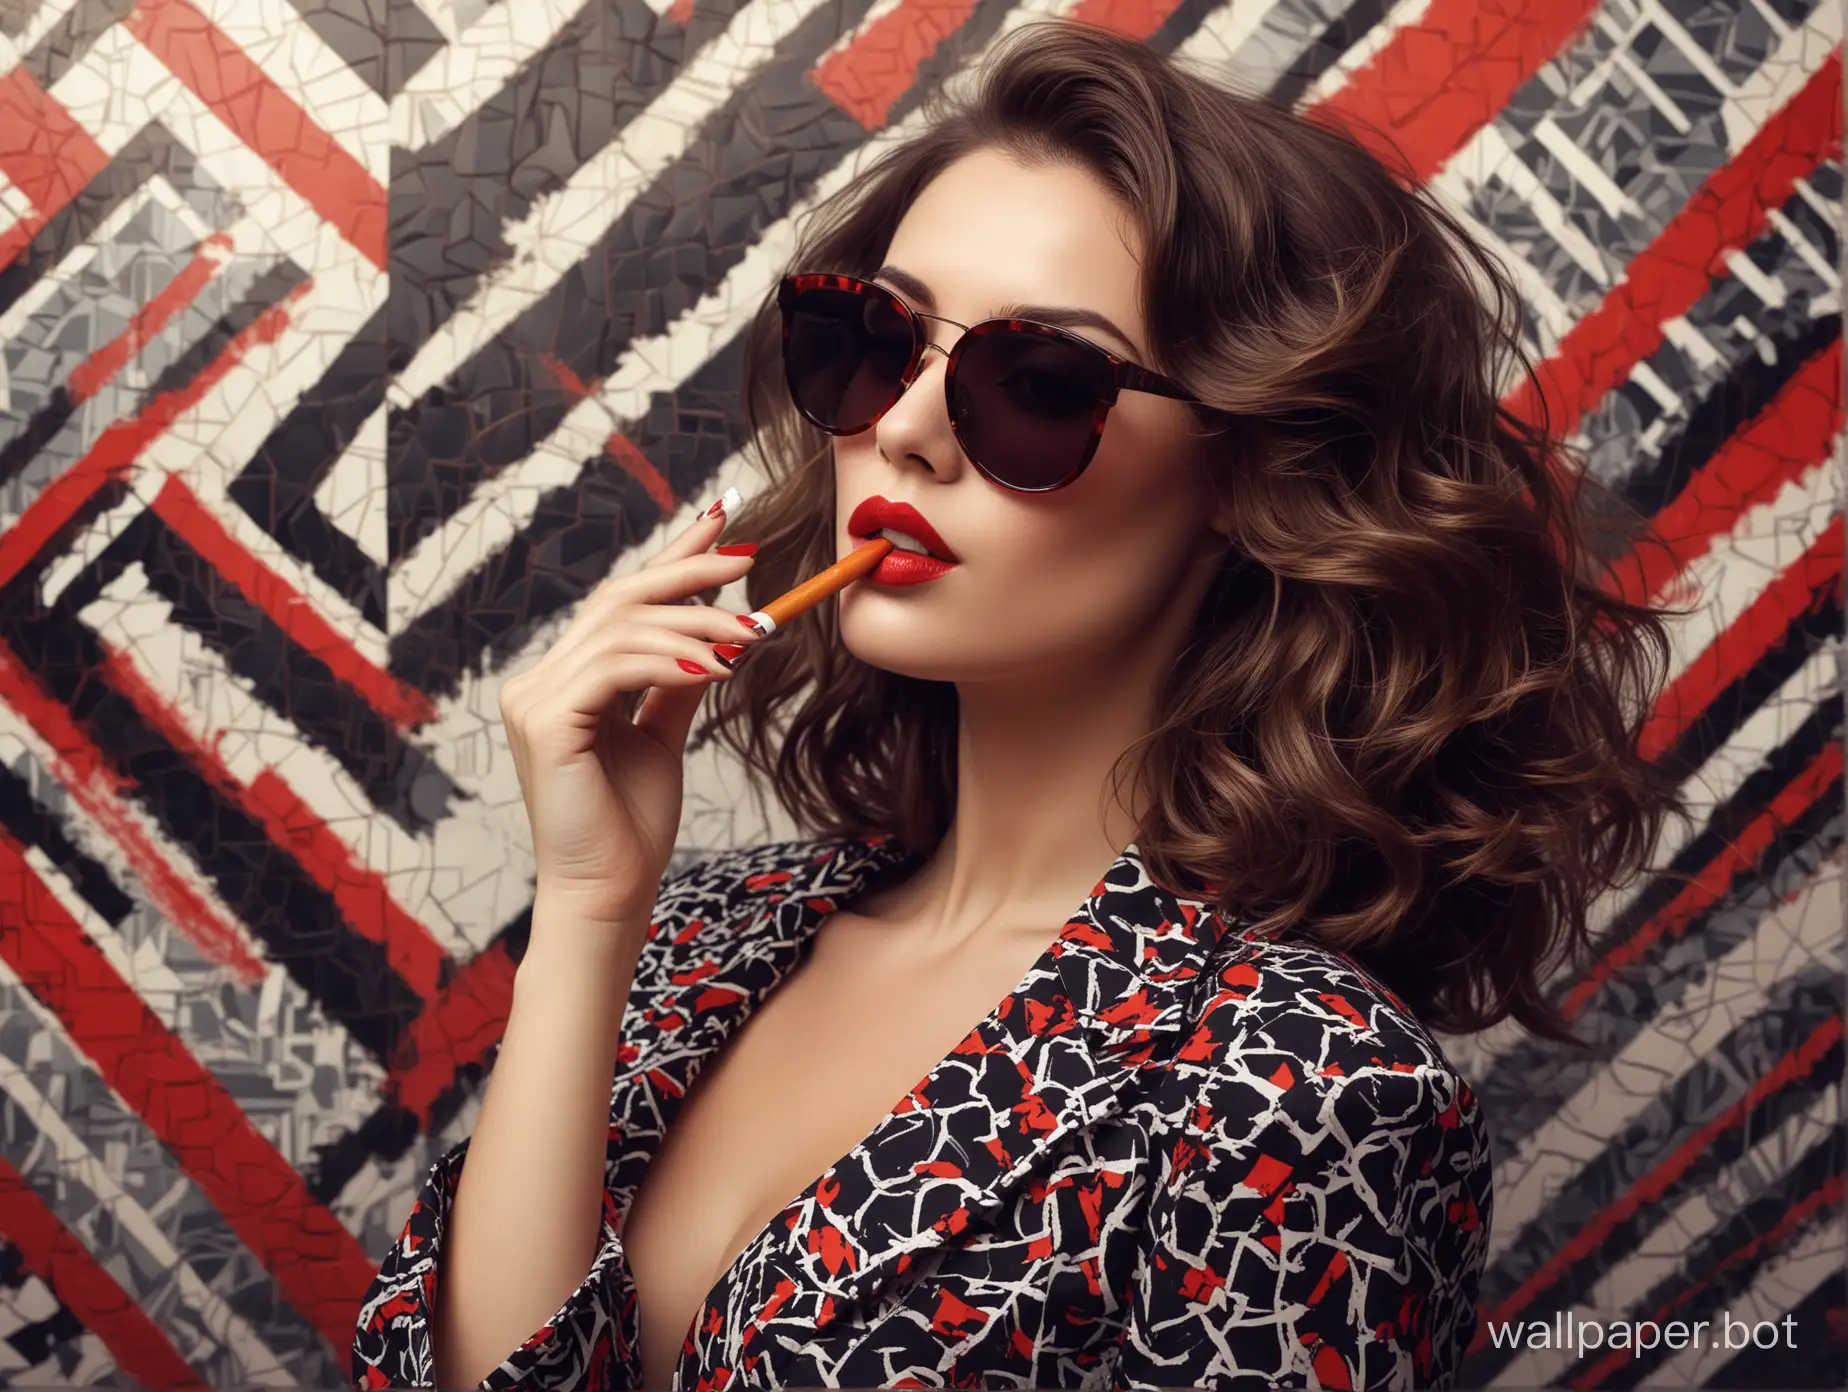 Chic-Brunette-Woman-with-Sunglasses-and-Cigarette-in-Abstract-Setting